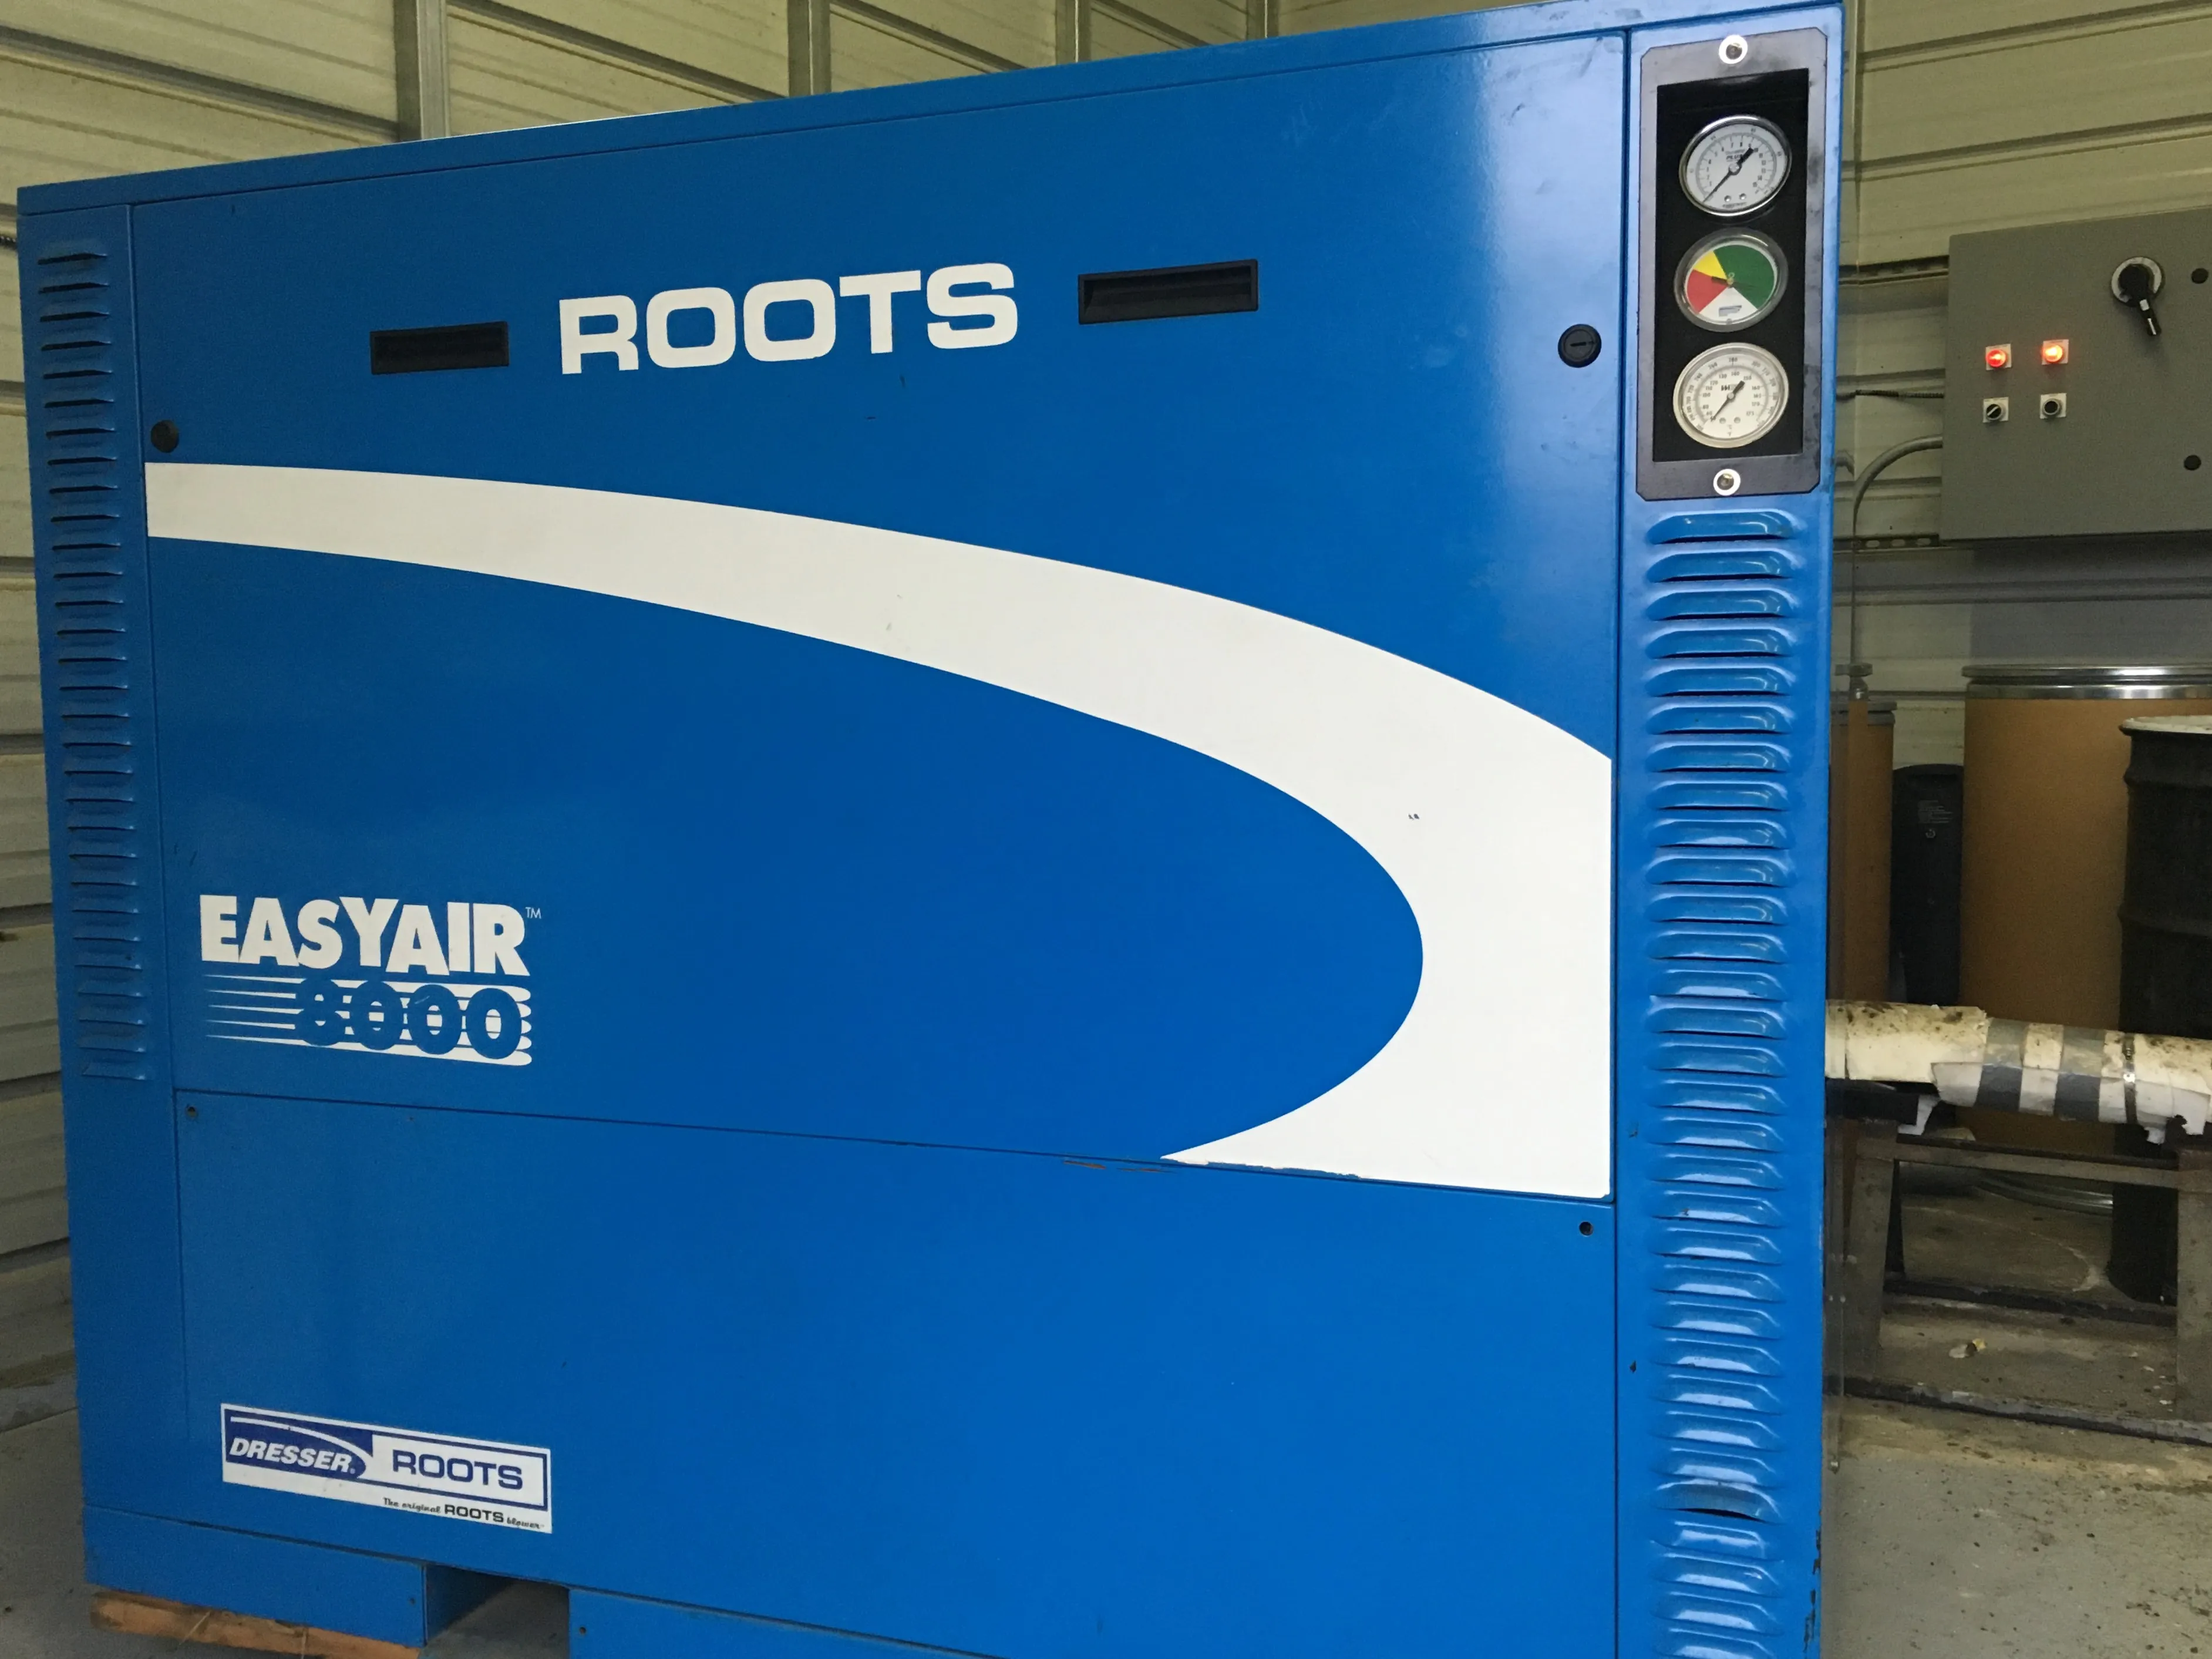 Dresser ROOTS EasyAir 8000 Factory Blower Package System (25HP) with Electrical Operating Panel - Fully Operational Rarely Used 